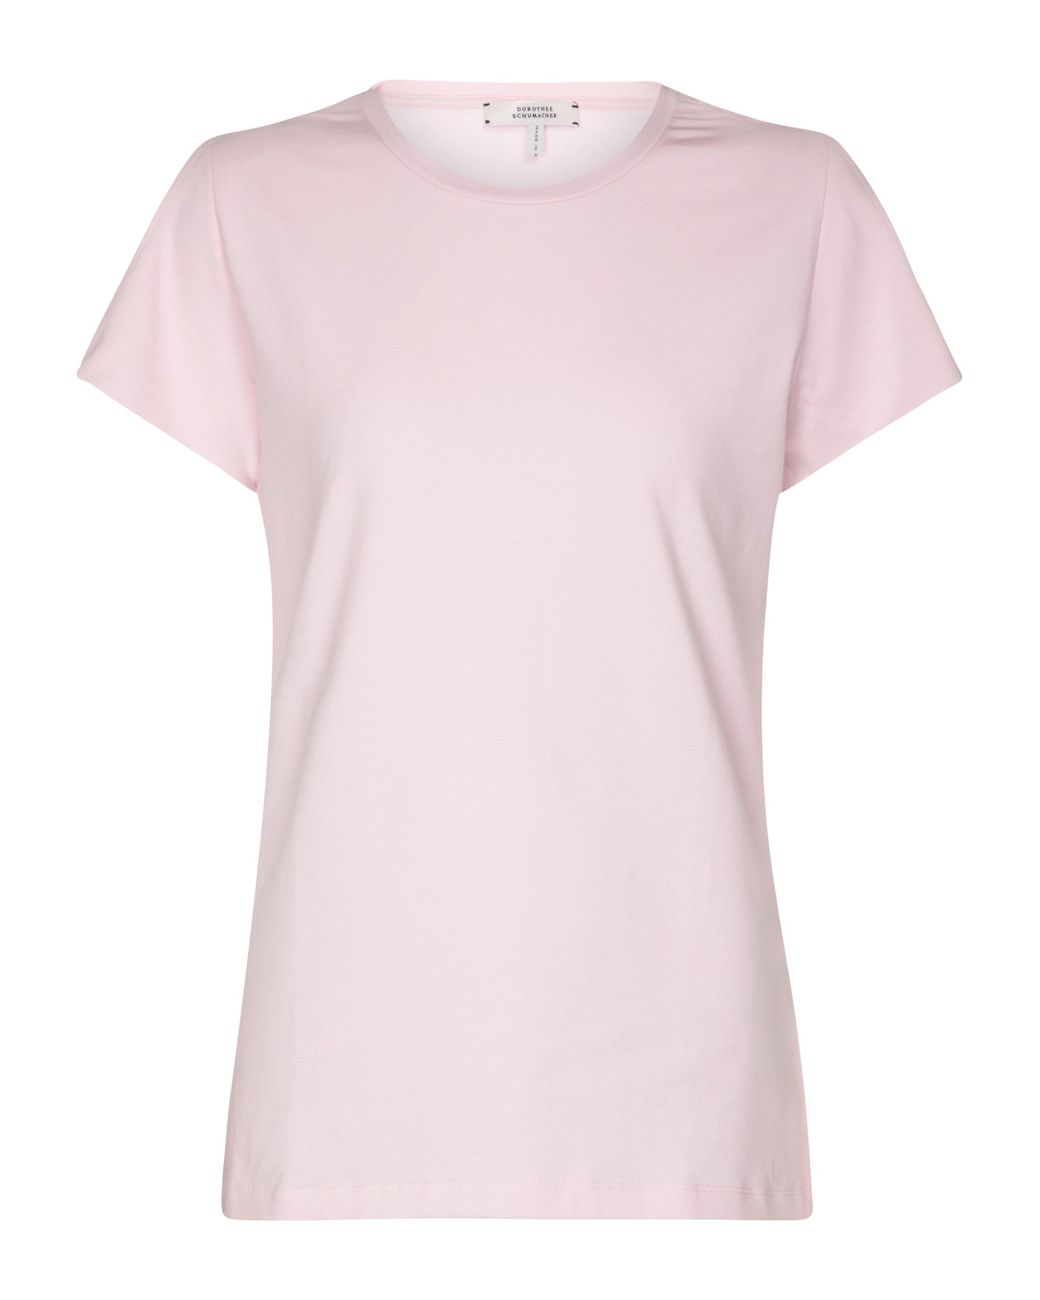 Dorothee Schumacher Set Of 2 Stretch-cotton Jersey T-shirts in Pink - Lyst